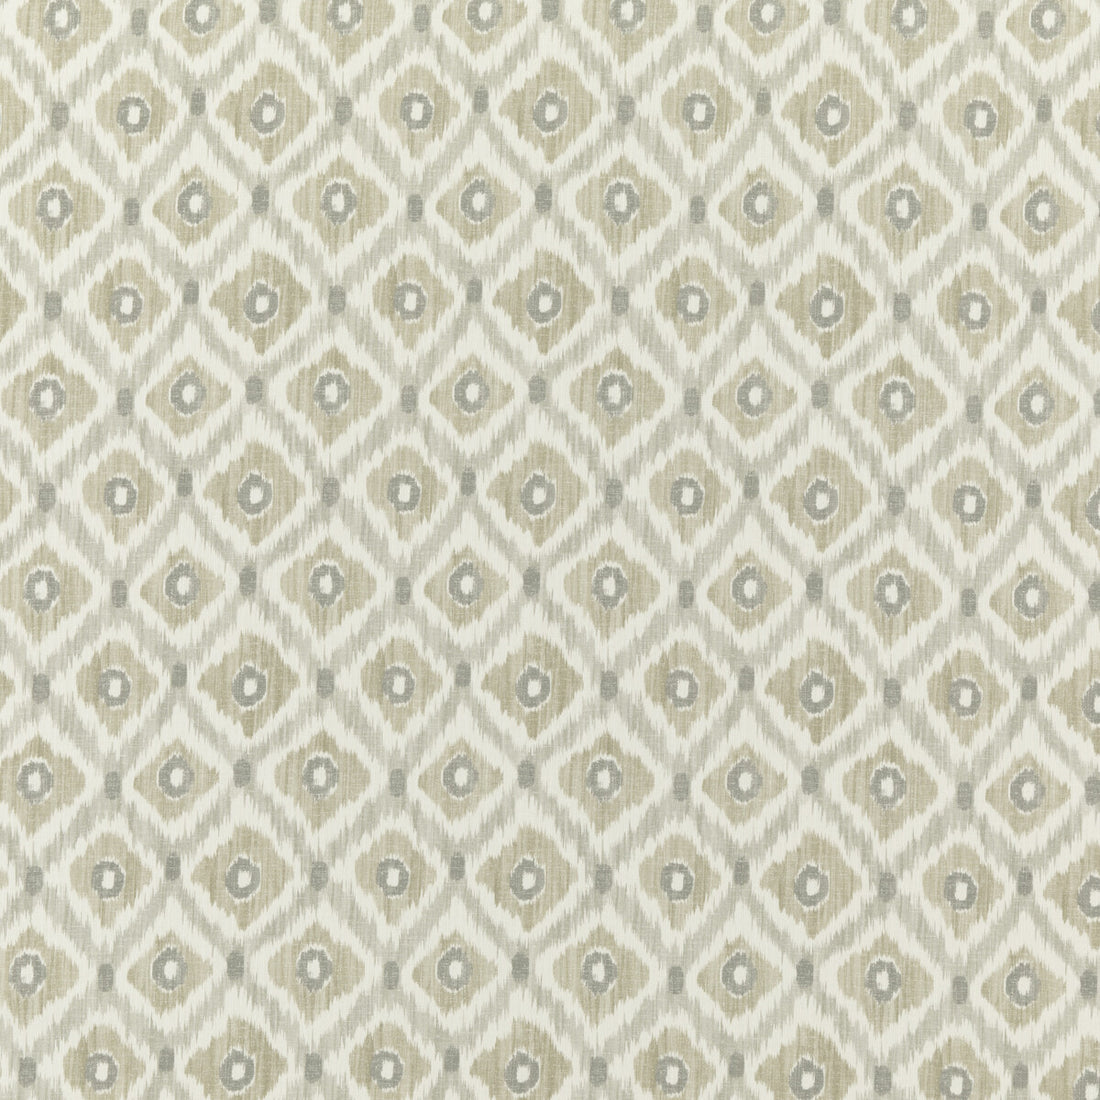 Vasco fabric in stone color - pattern PP50448.2.0 - by Baker Lifestyle in the Homes &amp; Gardens III collection